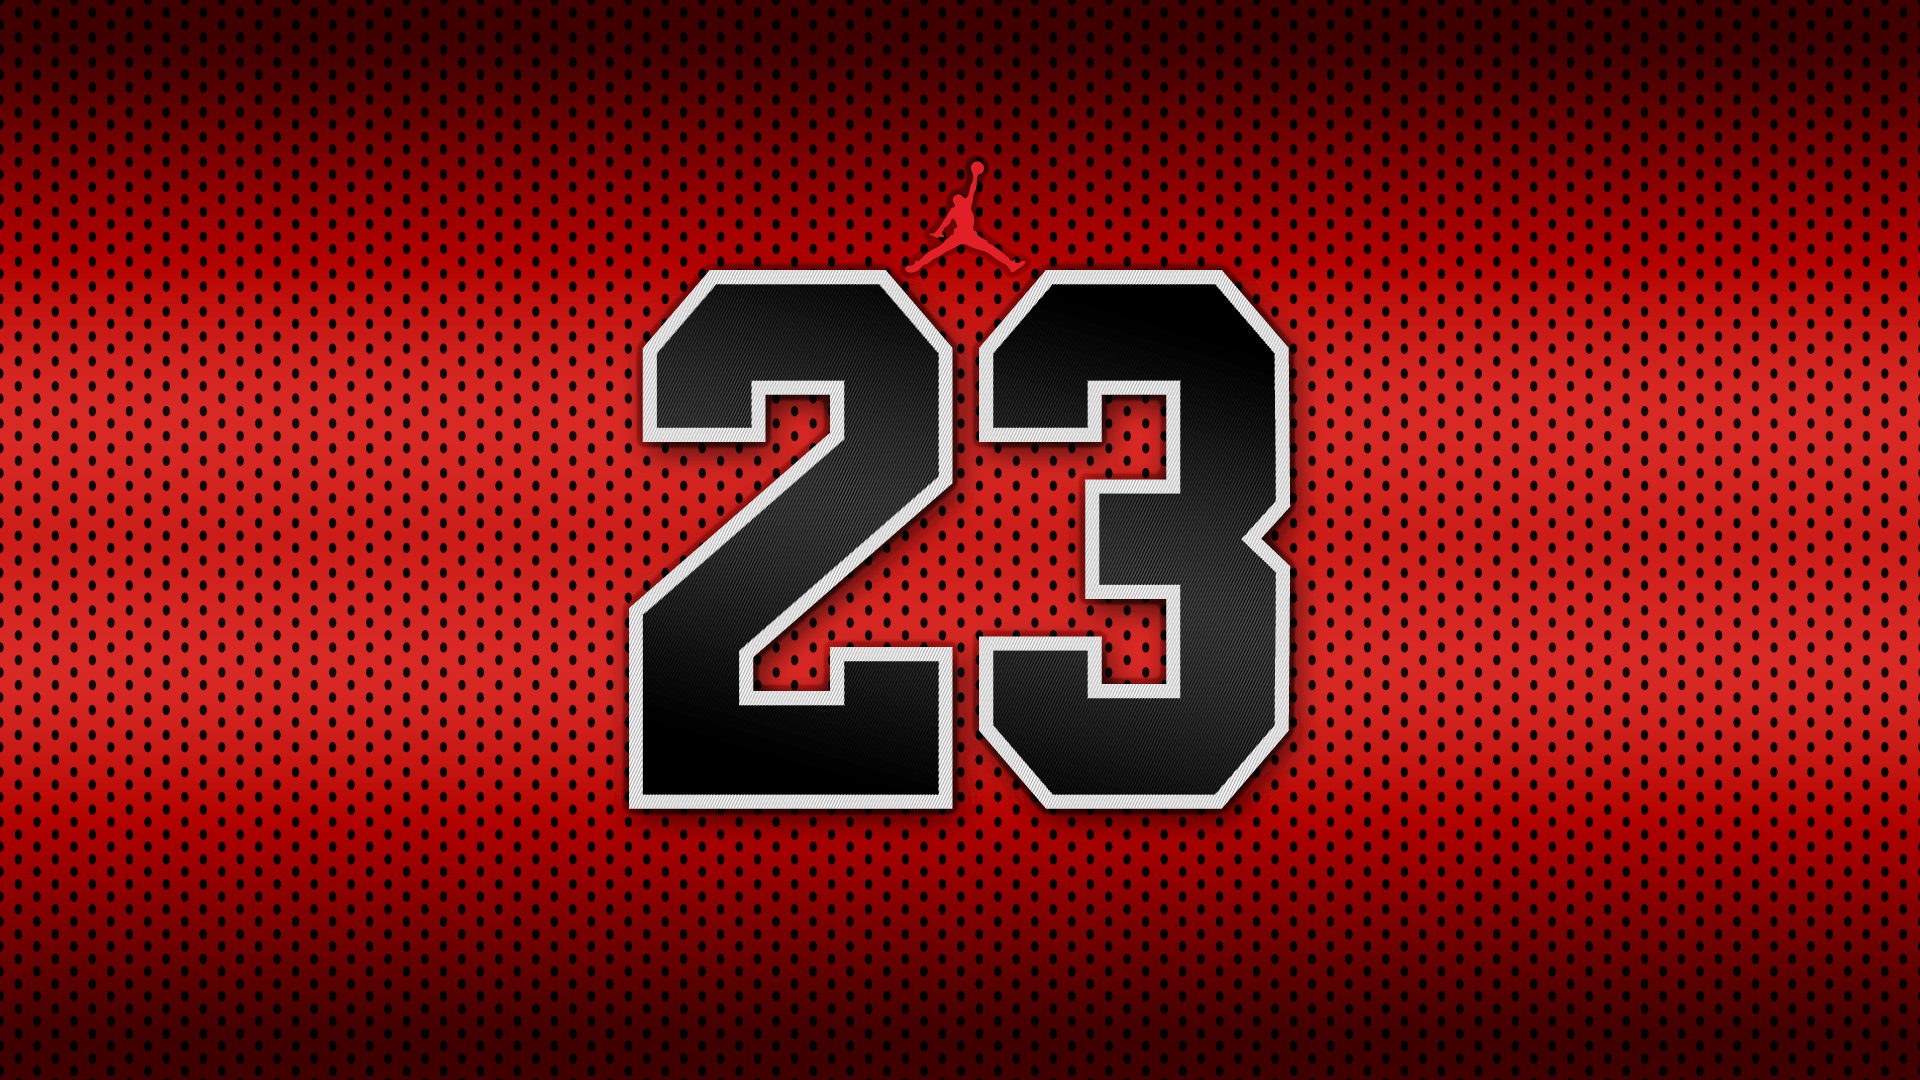 Red and Black Jordan Wallpapers on